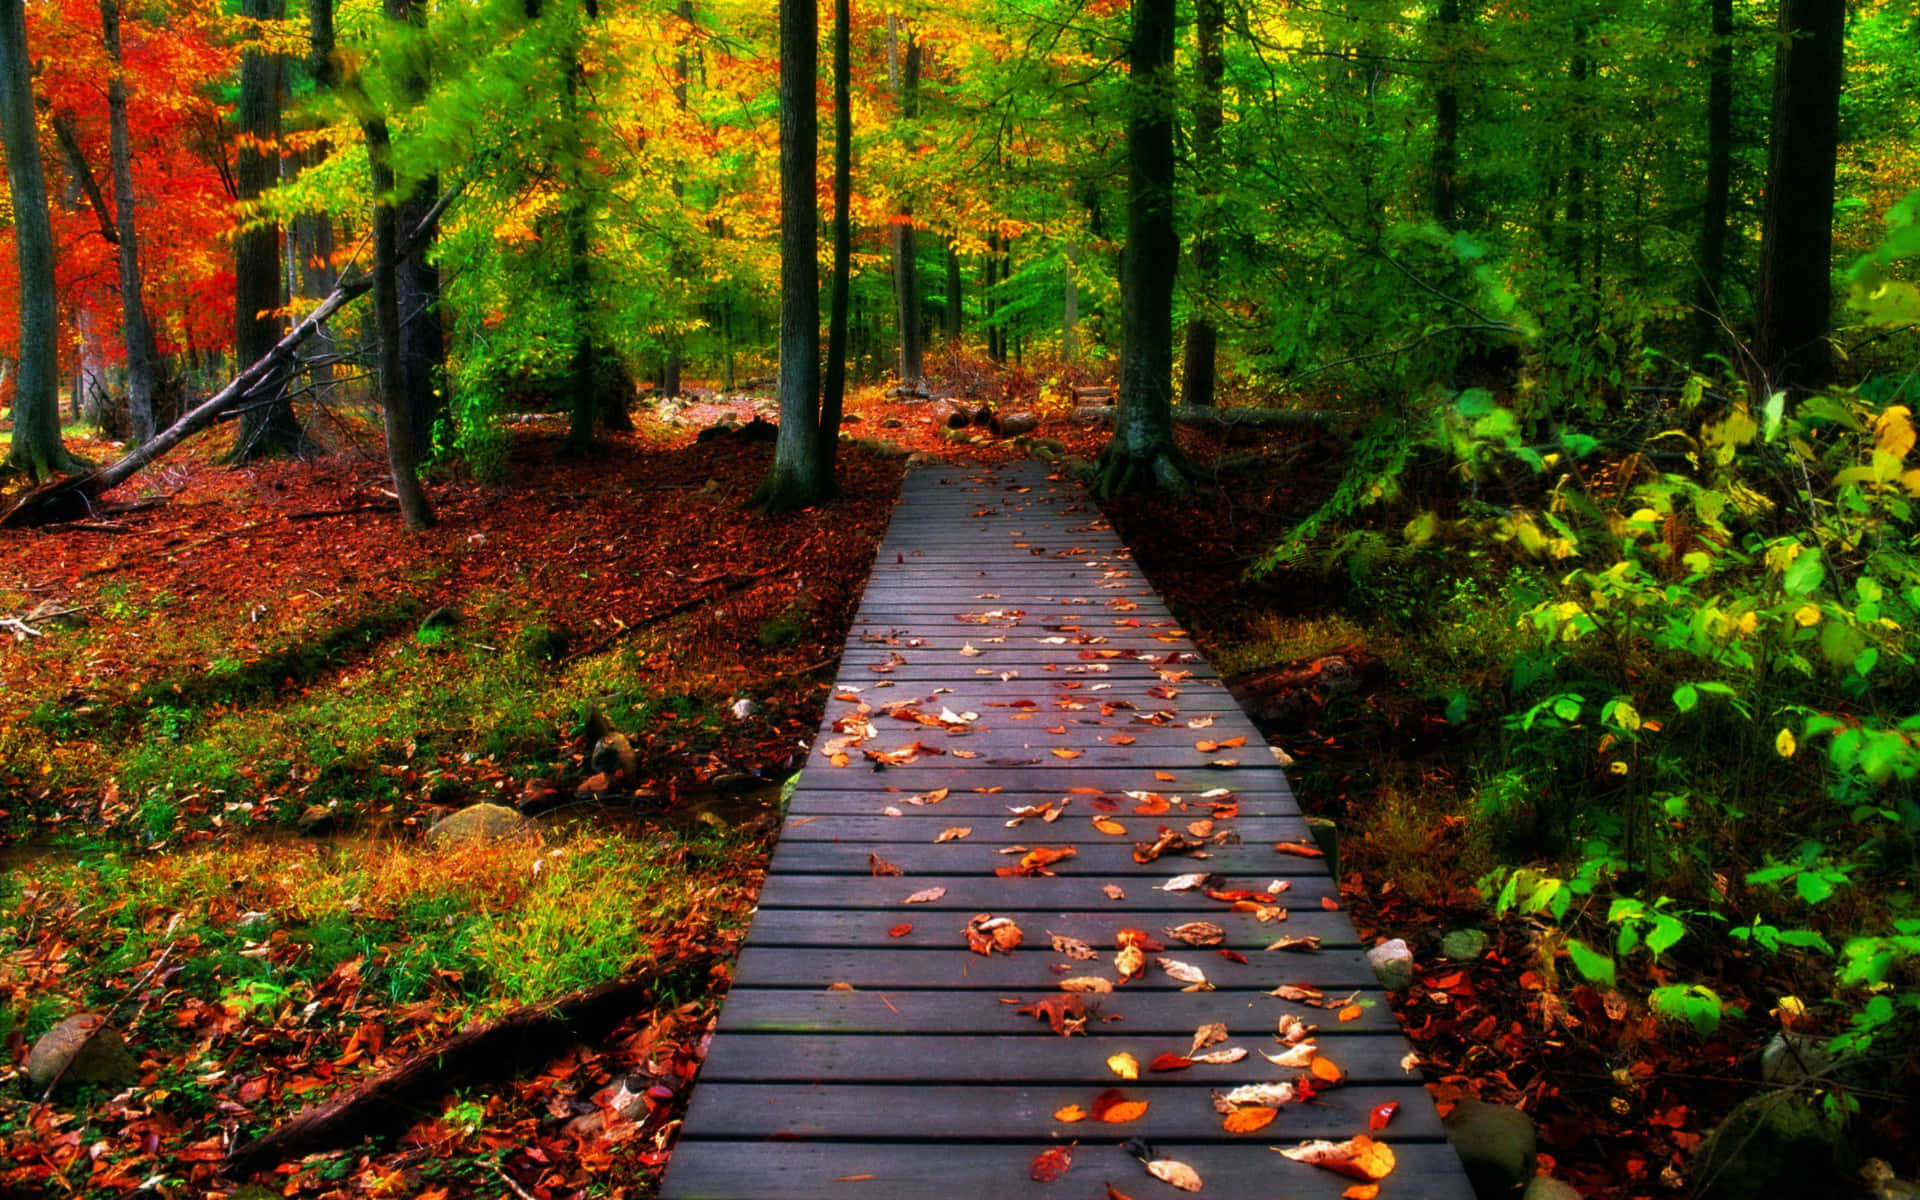 A peaceful view of nature in fall Wallpaper